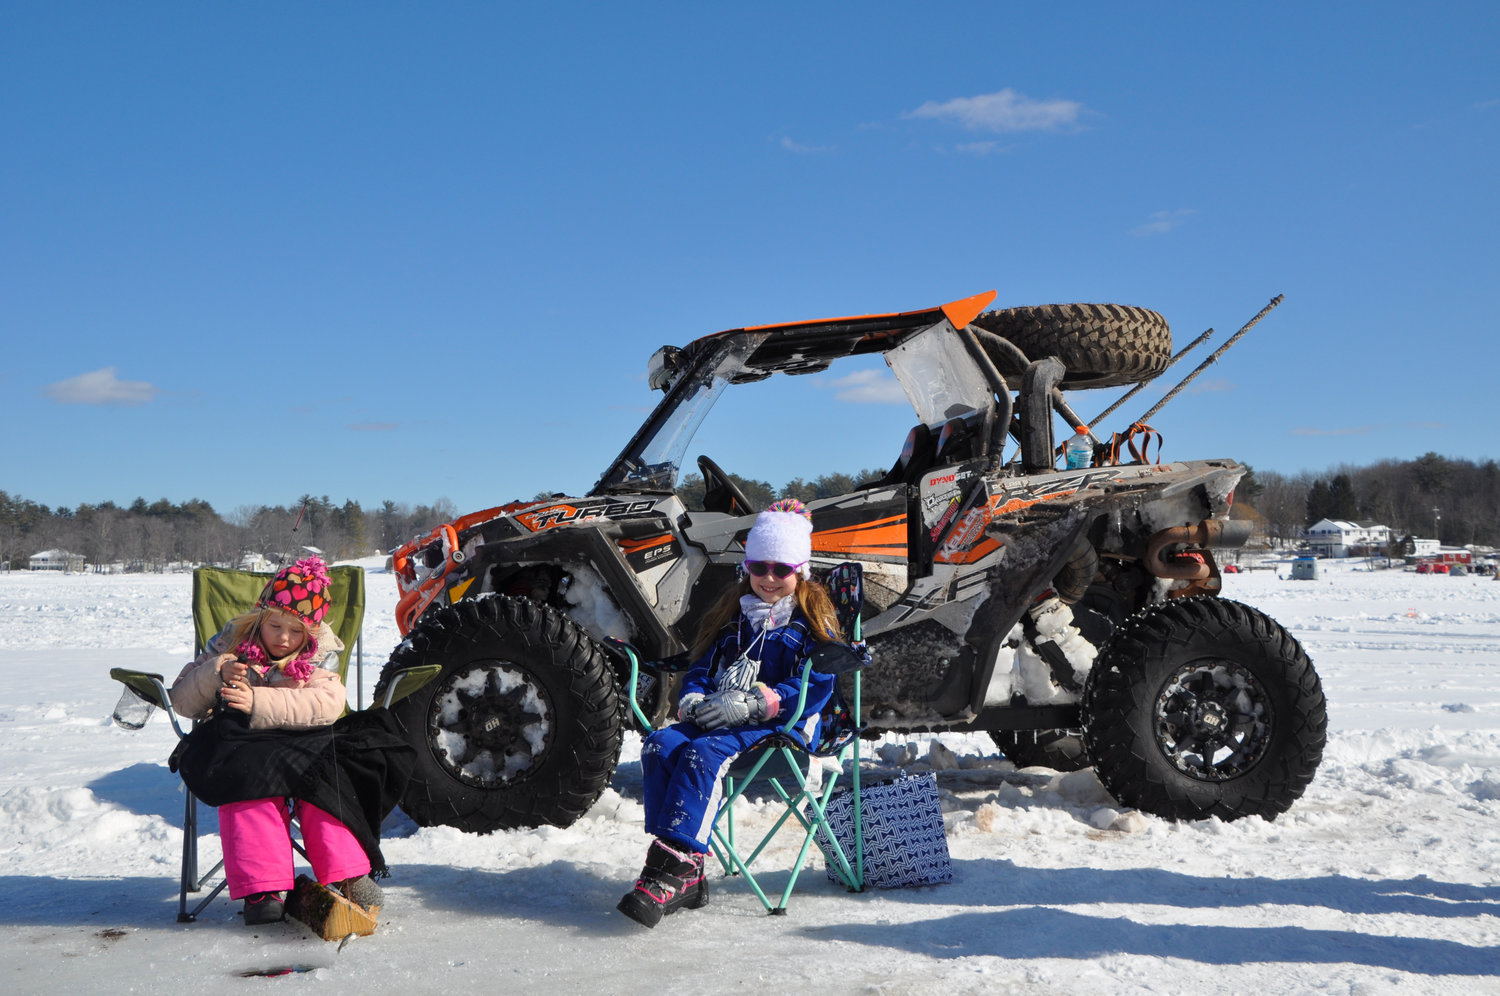 These young ladies—Delano, age 7, left, and Sydney, age 8, were enjoying the fresh air and the beautiful day at the Sullivan County Conservation Club's annual King of the Ice tourney last Sunday in White lake, NY.